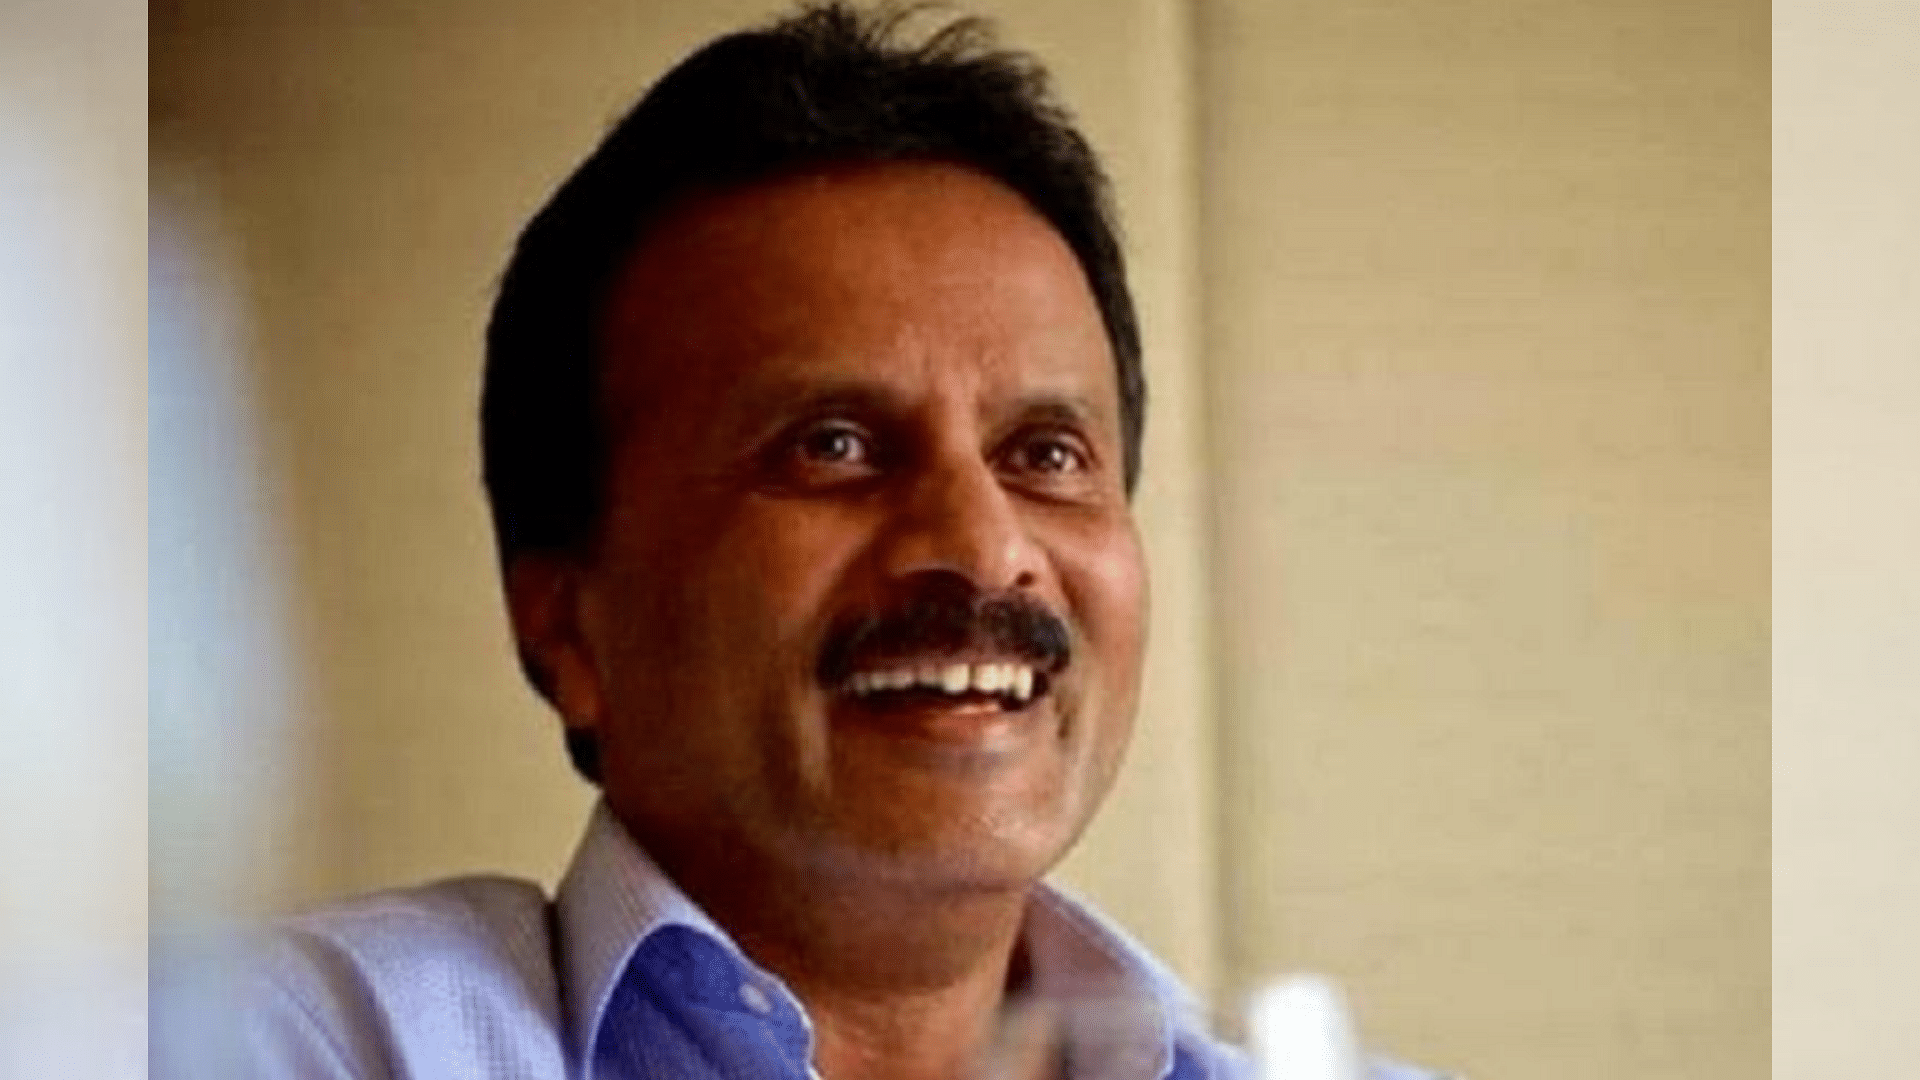 The 58-year-old was one of the biggest entrepreneurs from Karnataka’s Malnad region.